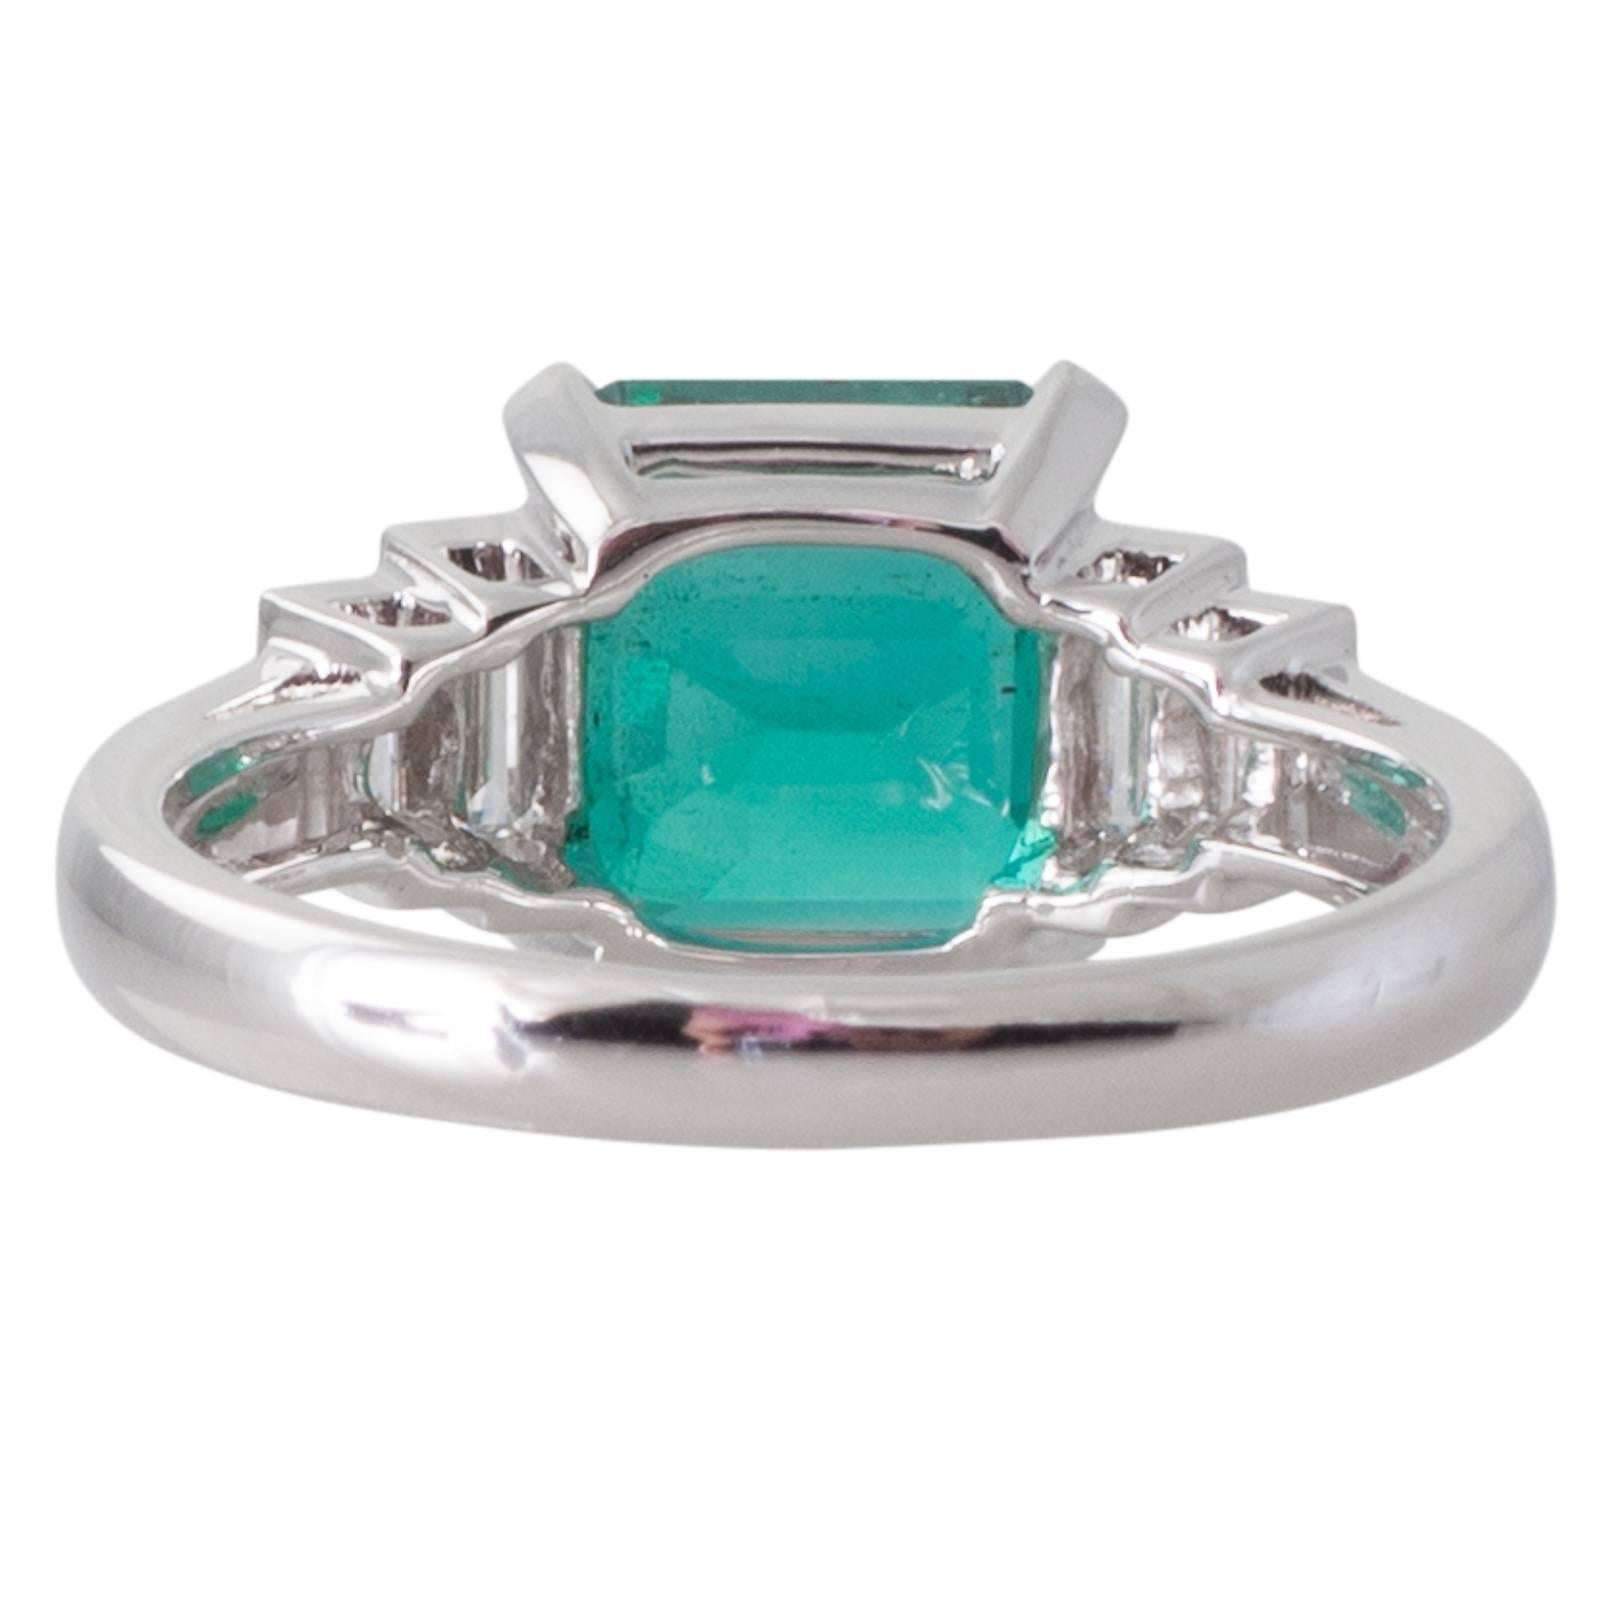 An 18ct white gold ring four claw set to the centre with a GIA certified 3.34ct Zambian octagonal step cut emerald above a railed gallery and to either side a pair of baguette cut diamonds to upswept shoulders and a plain polished band. Total